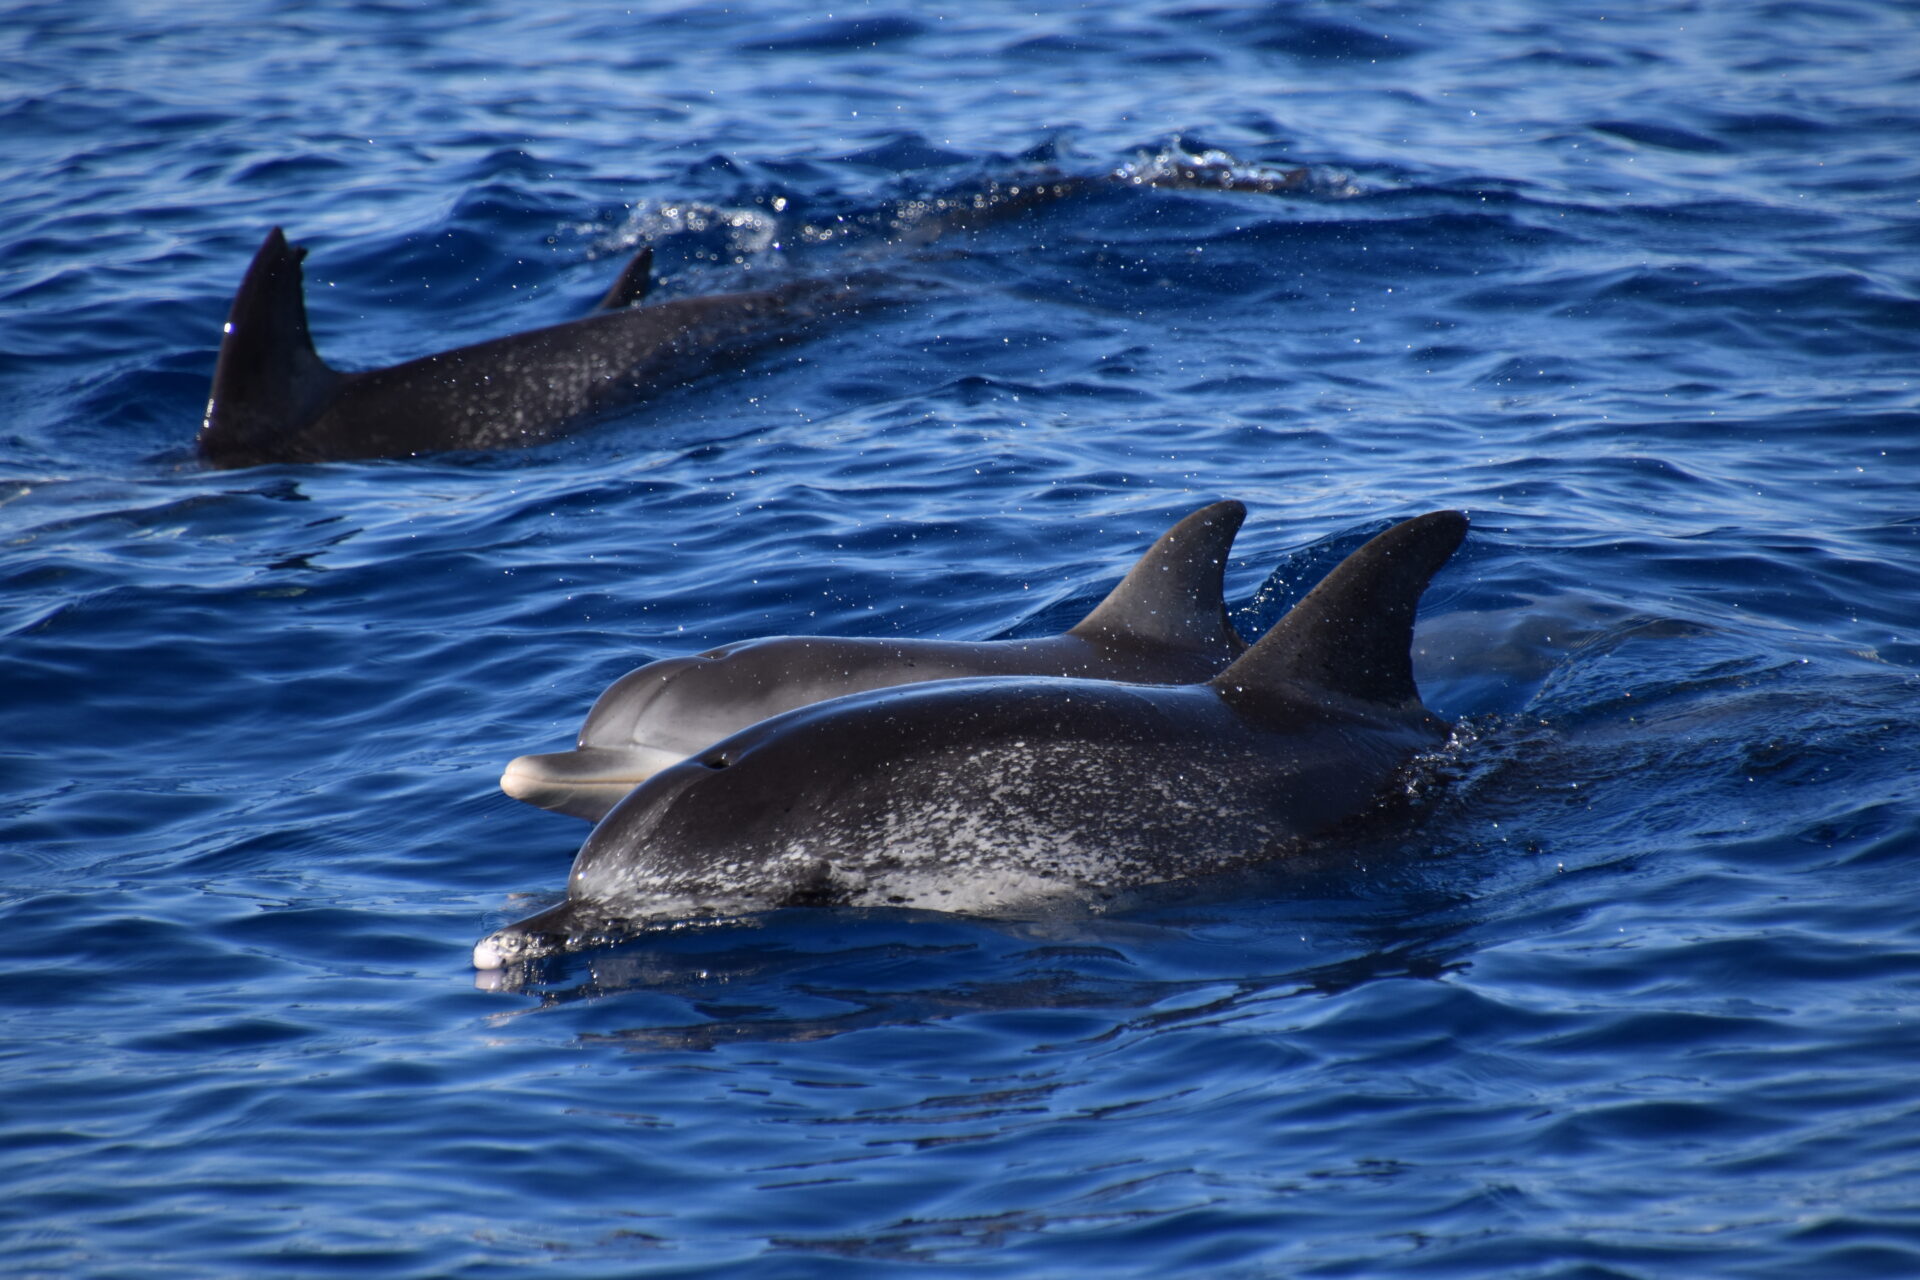 Spotted dolphins, Delfine, Wal- und Delfinbeobachtung